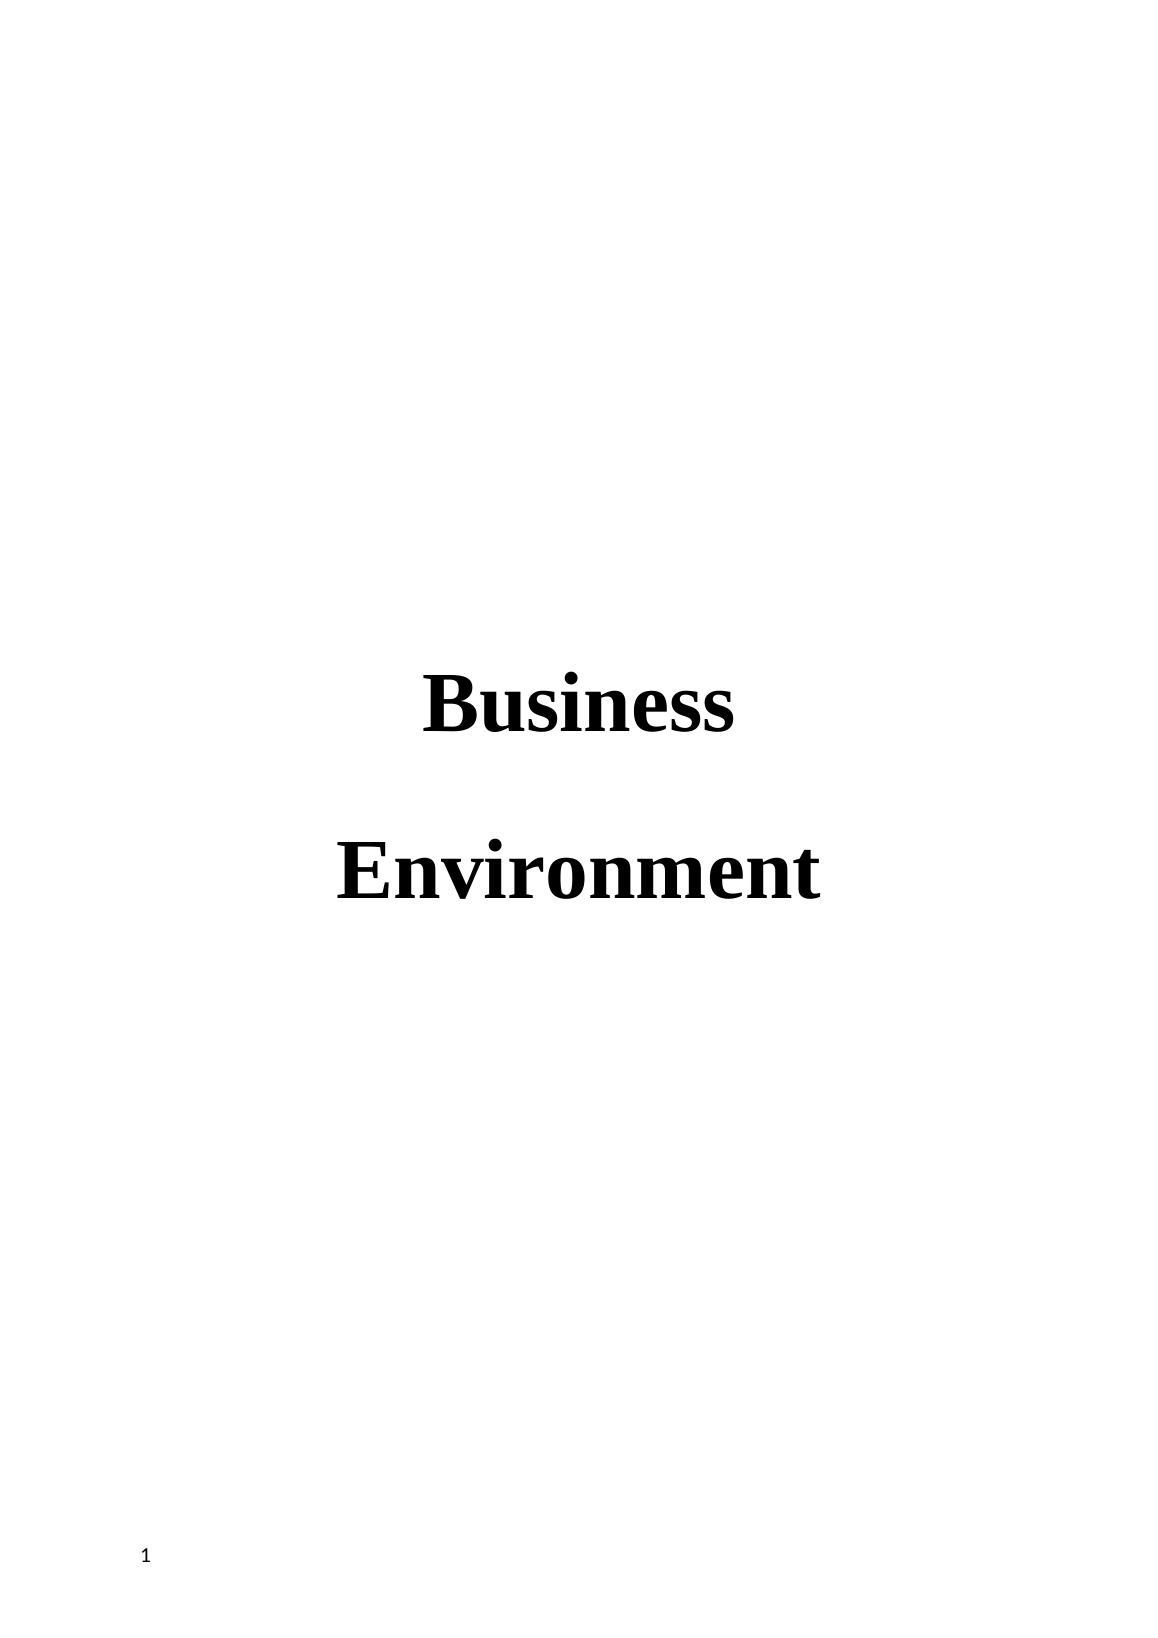 Analyzing Business Environment of NESTLE : Assignment_1